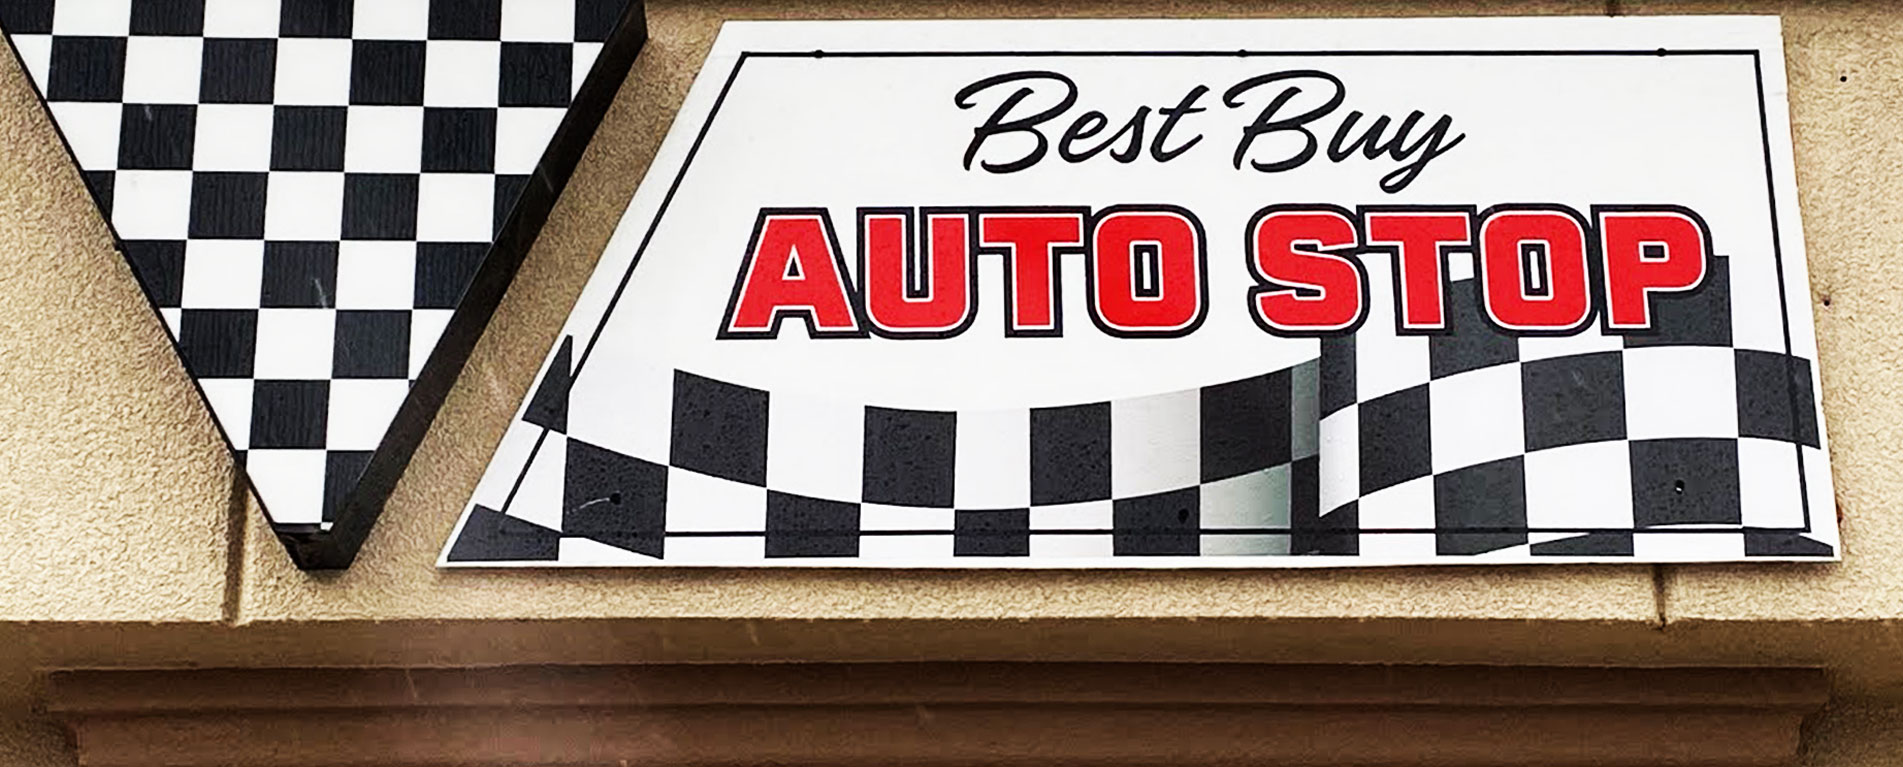 Used cars for sale in West Babylon | Best Buy Auto Stop. West Babylon NY